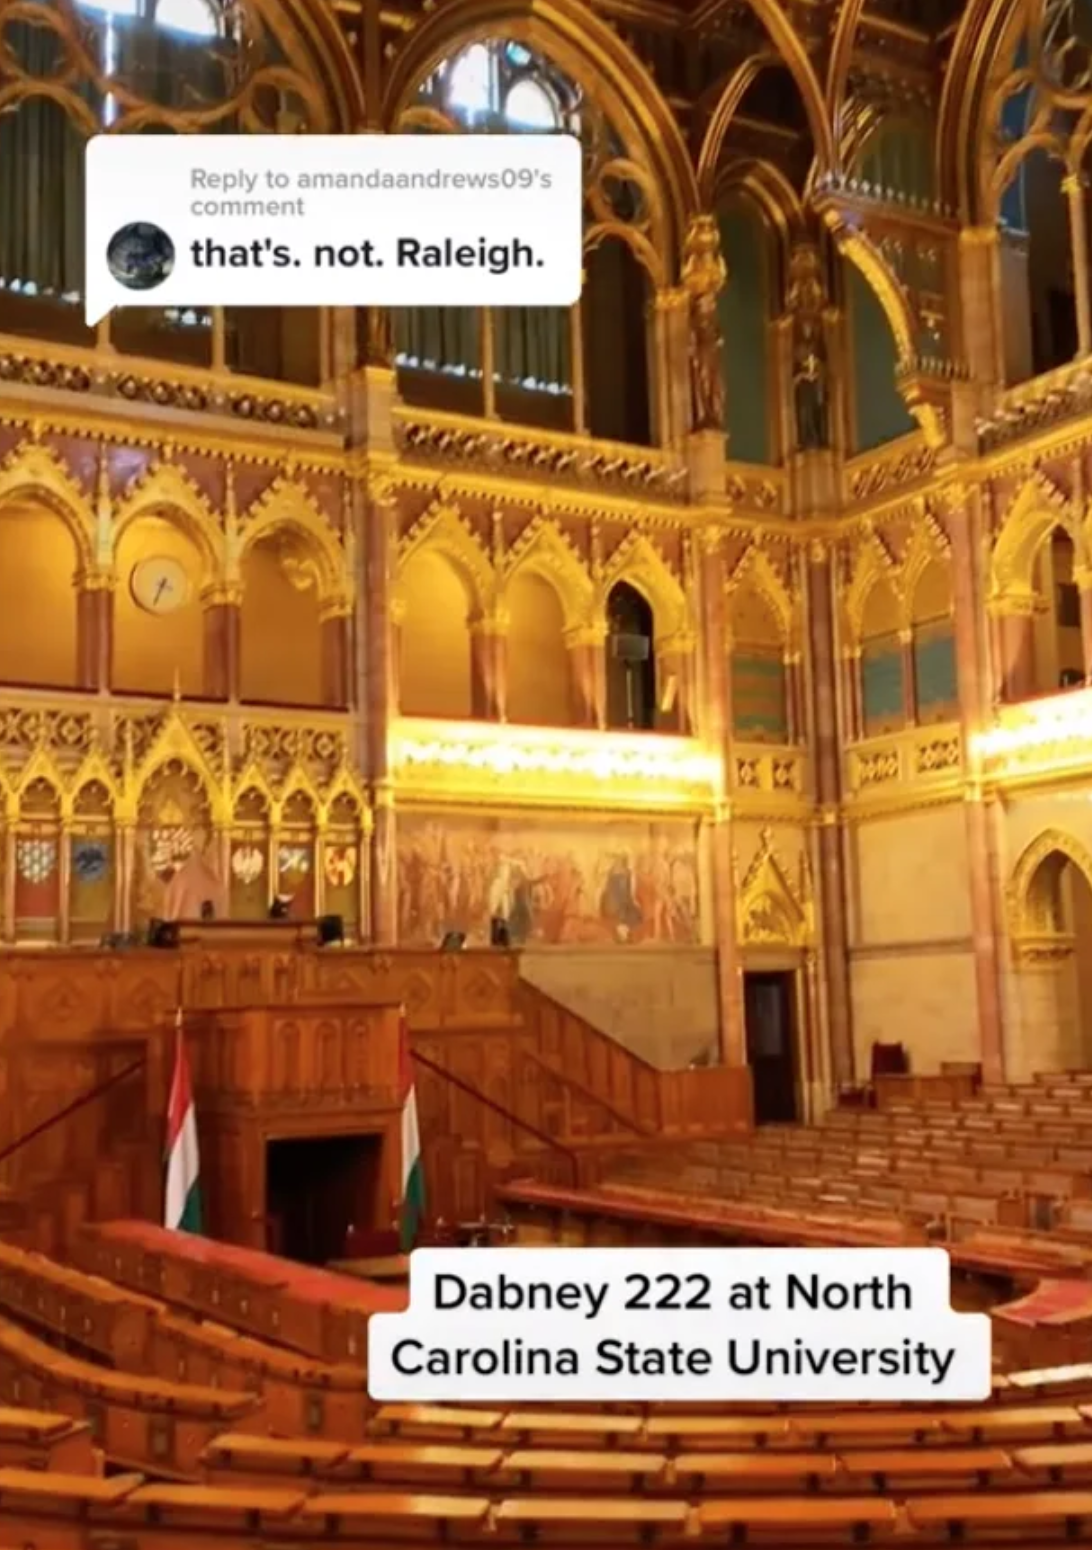 palace of parliament hungary - to amandmandrews09's comment that's not. Raleigh. ts Dabney 222 at North Carolina State University